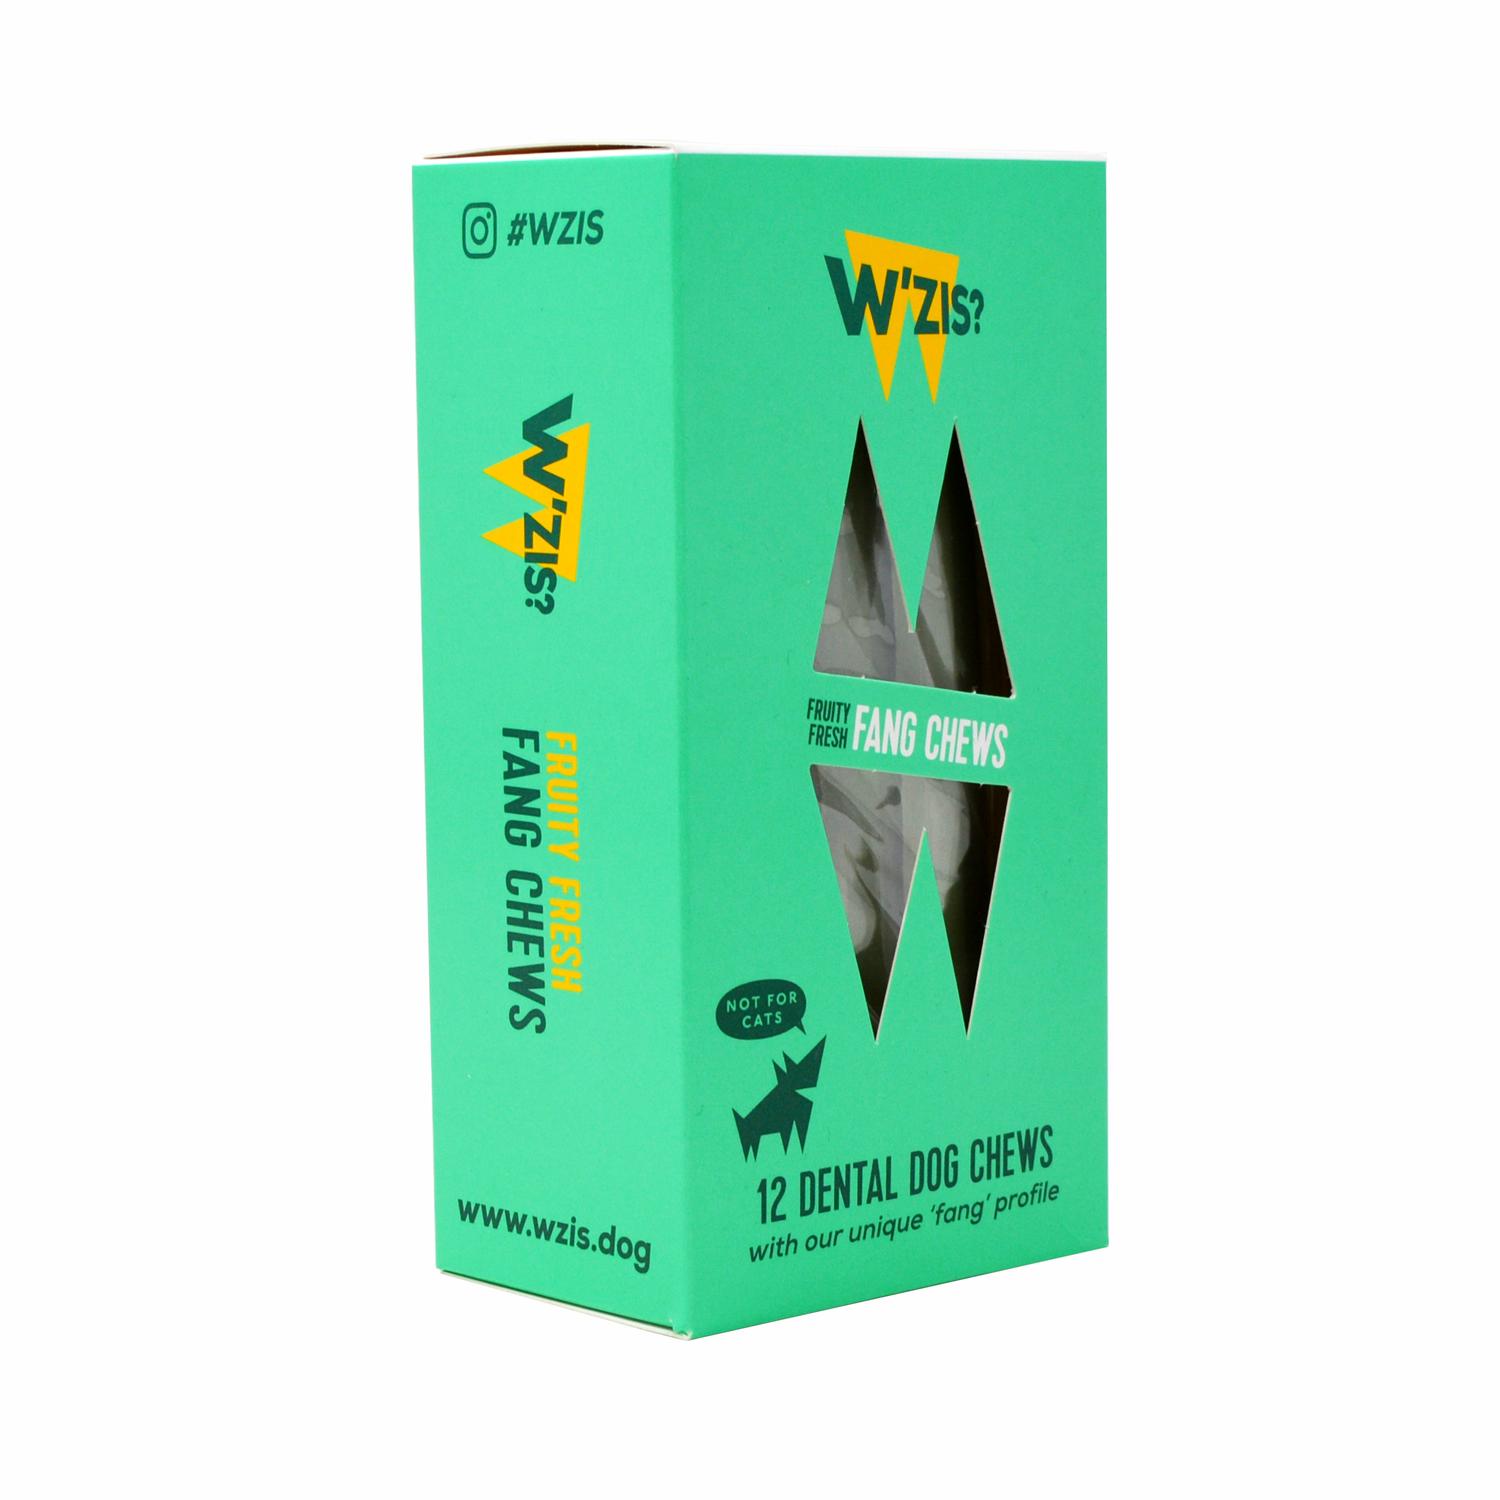 An angled pack of Plant Based Fruity Flavoured 'Fang' Vegan Dog Chews from Wzis